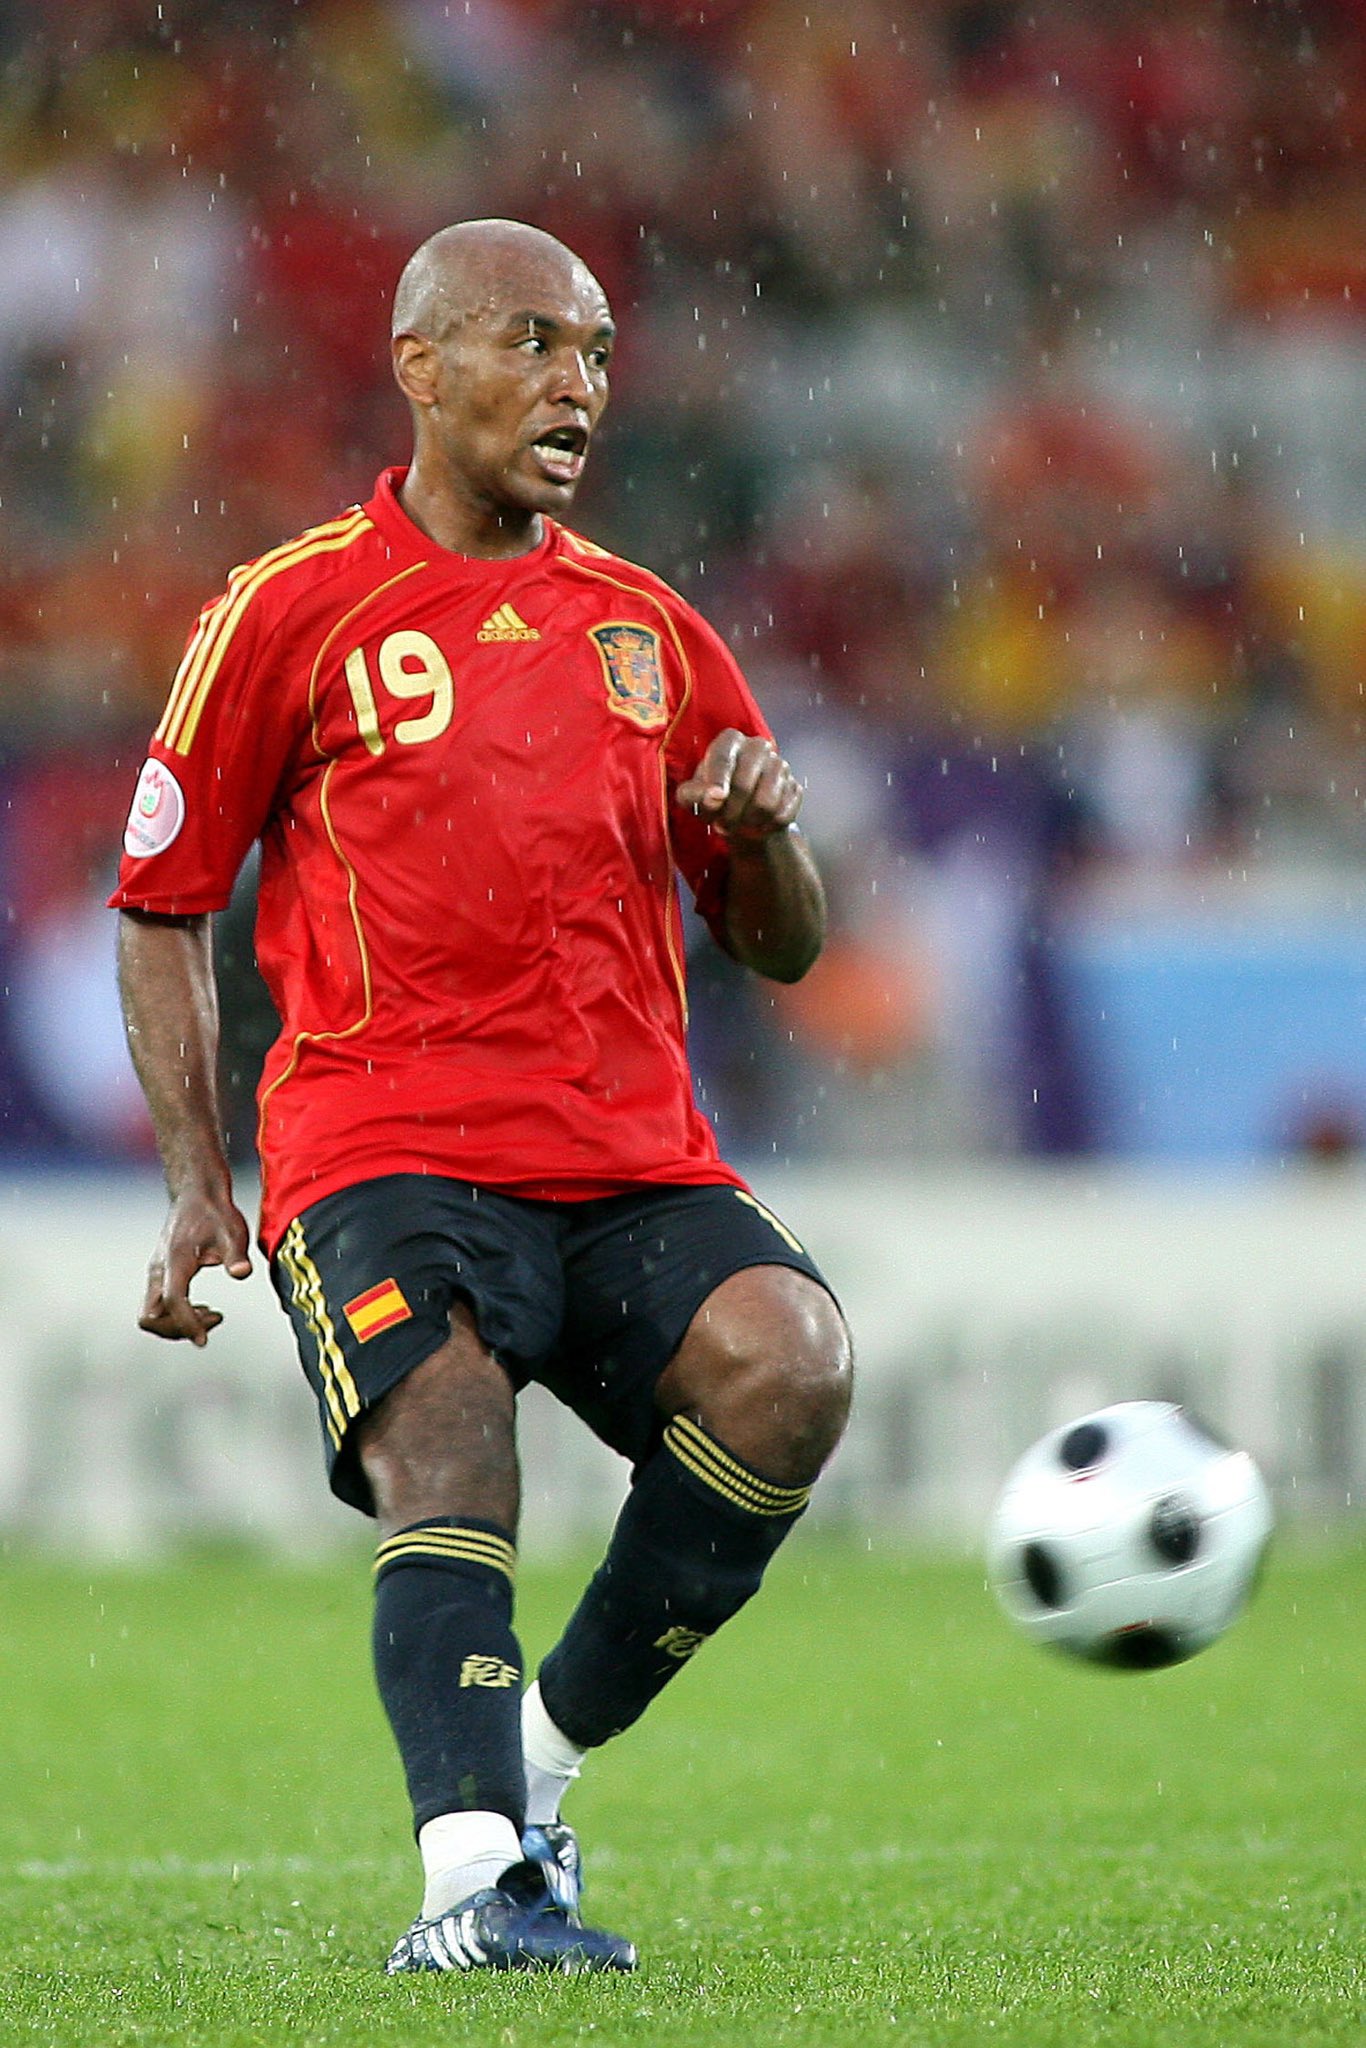 Football Tweet ⚽ on Twitter: "Run it back to Marcos Senna. 🇪🇸 Villarreal stalwart, in that Spain side at EURO 2008, that completely dominated. He finished 11th at the Ballon d'Or